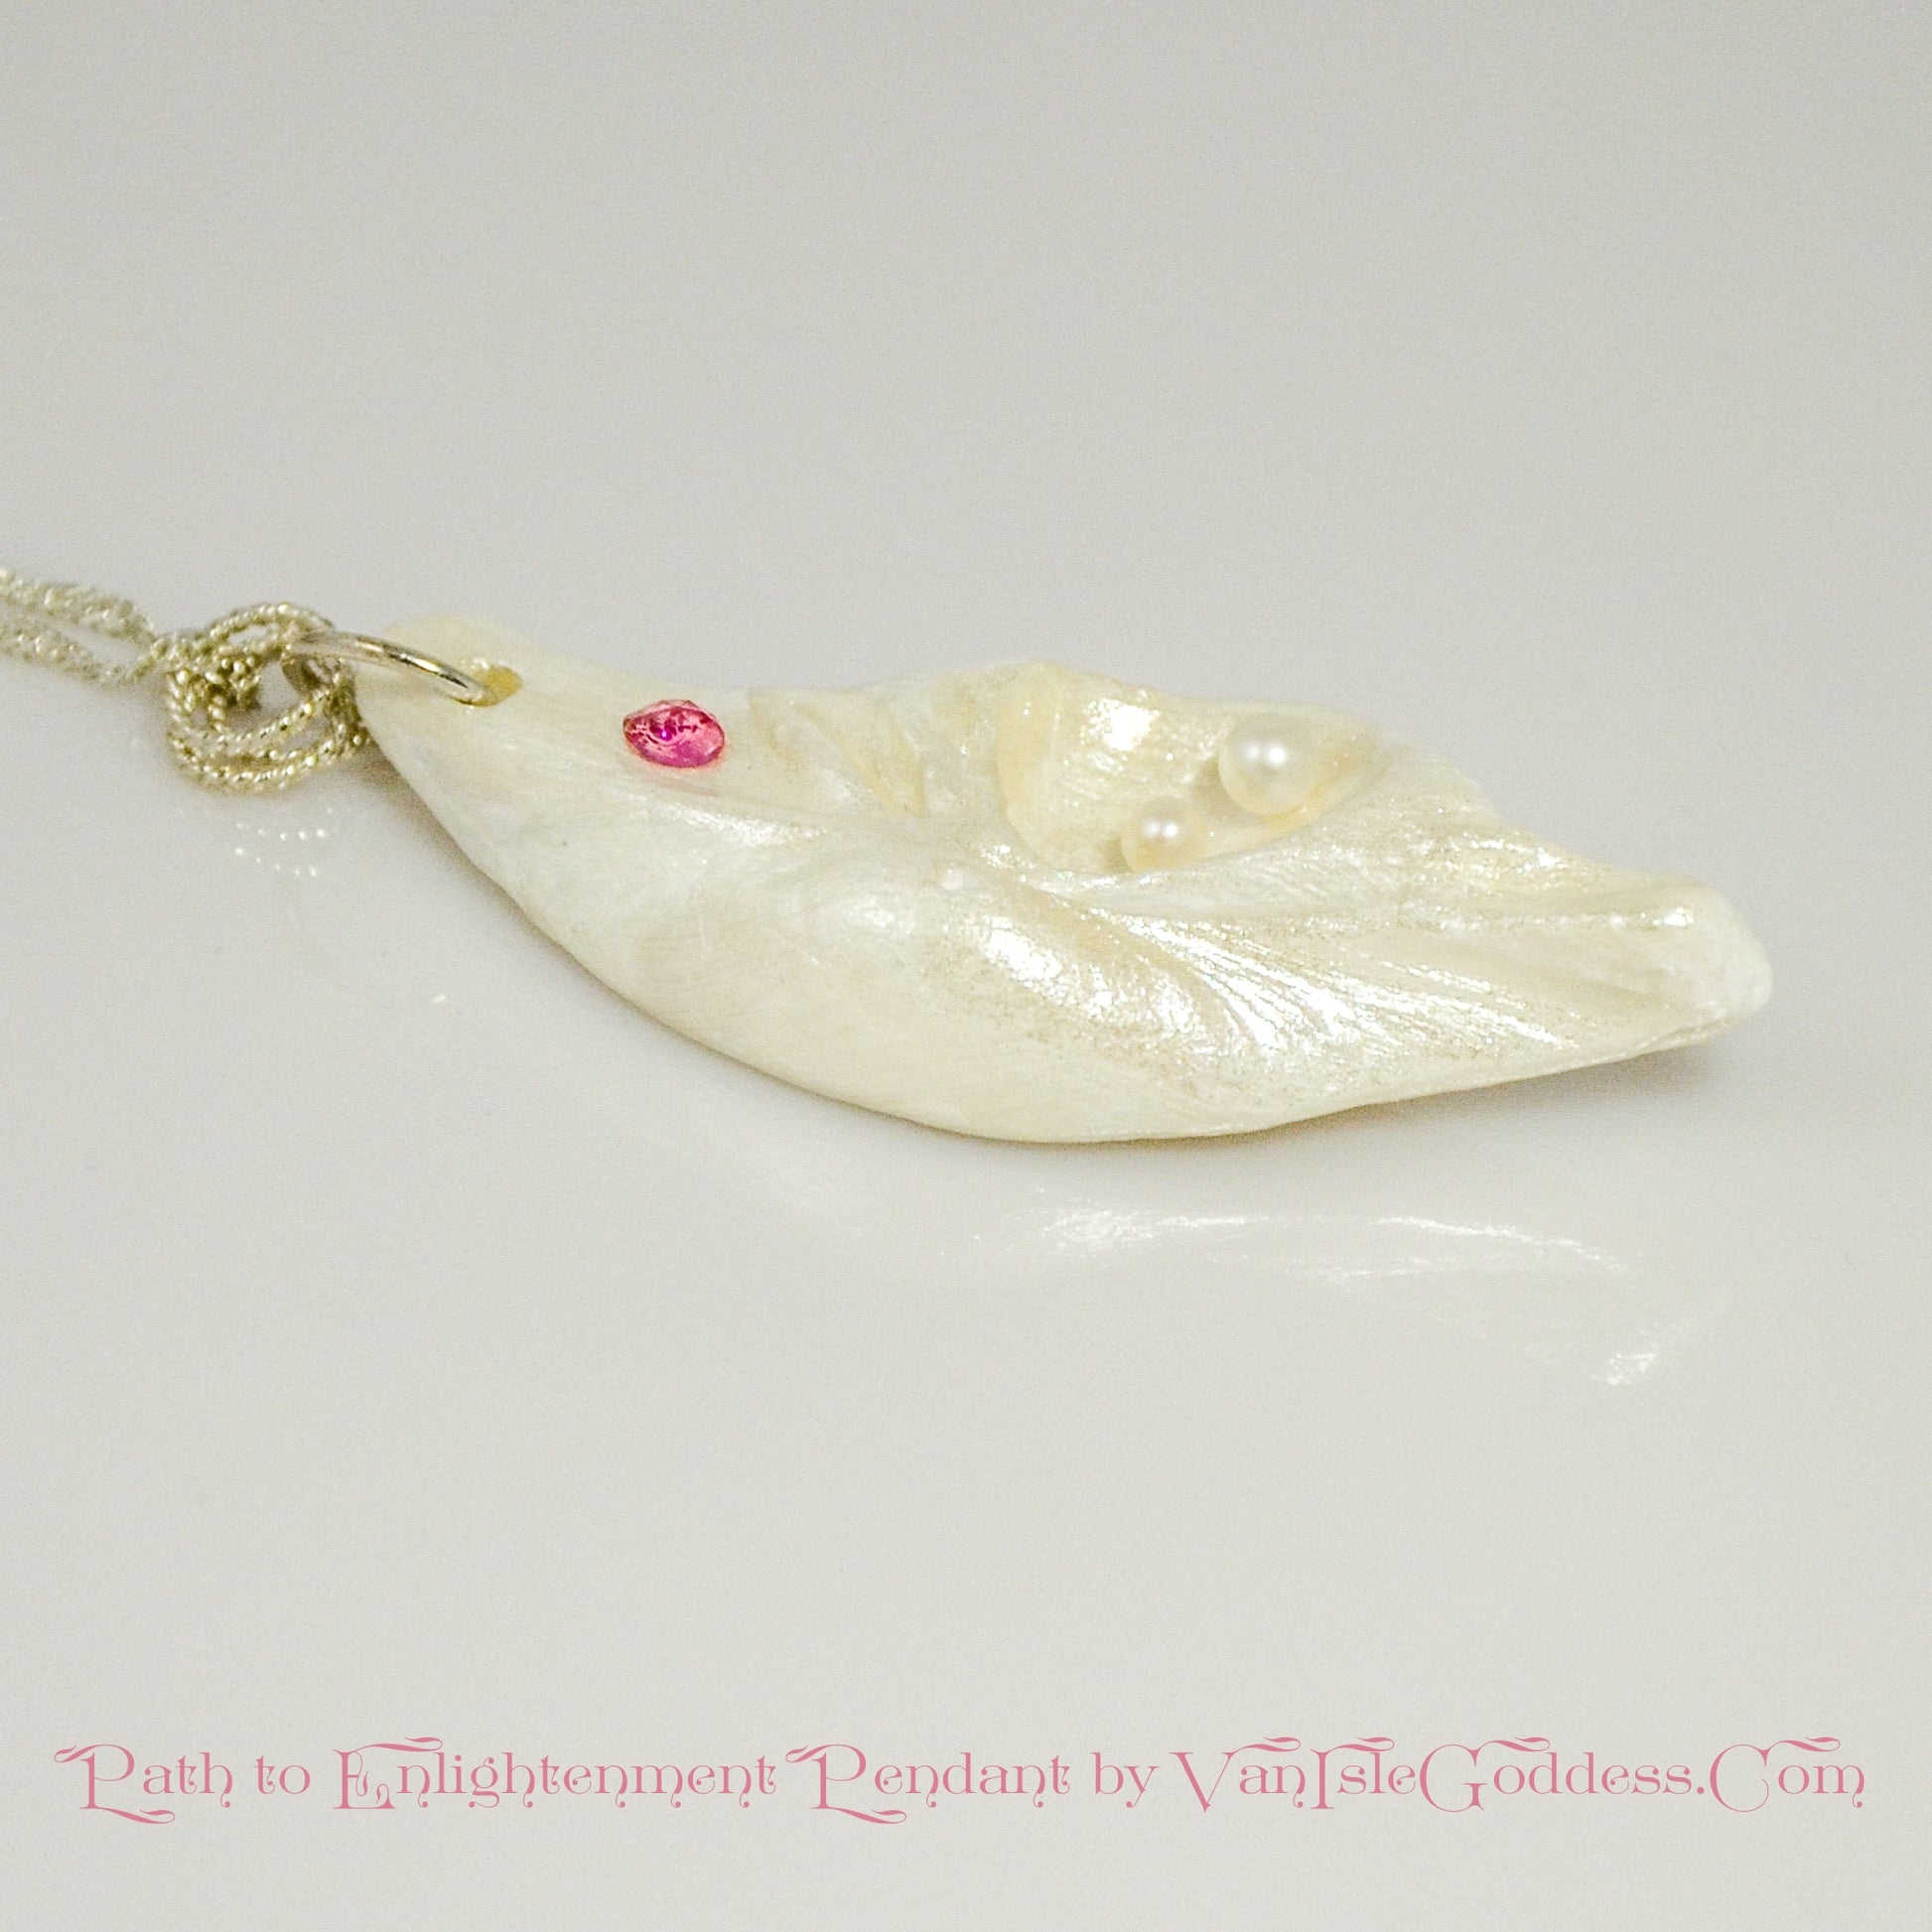 A trio of white baby freshwater pearls and a teardrop rose cut pink tourmaline gemstone compliments the seashell pendant beautifully. The pendant is shown laying down on a white table top.